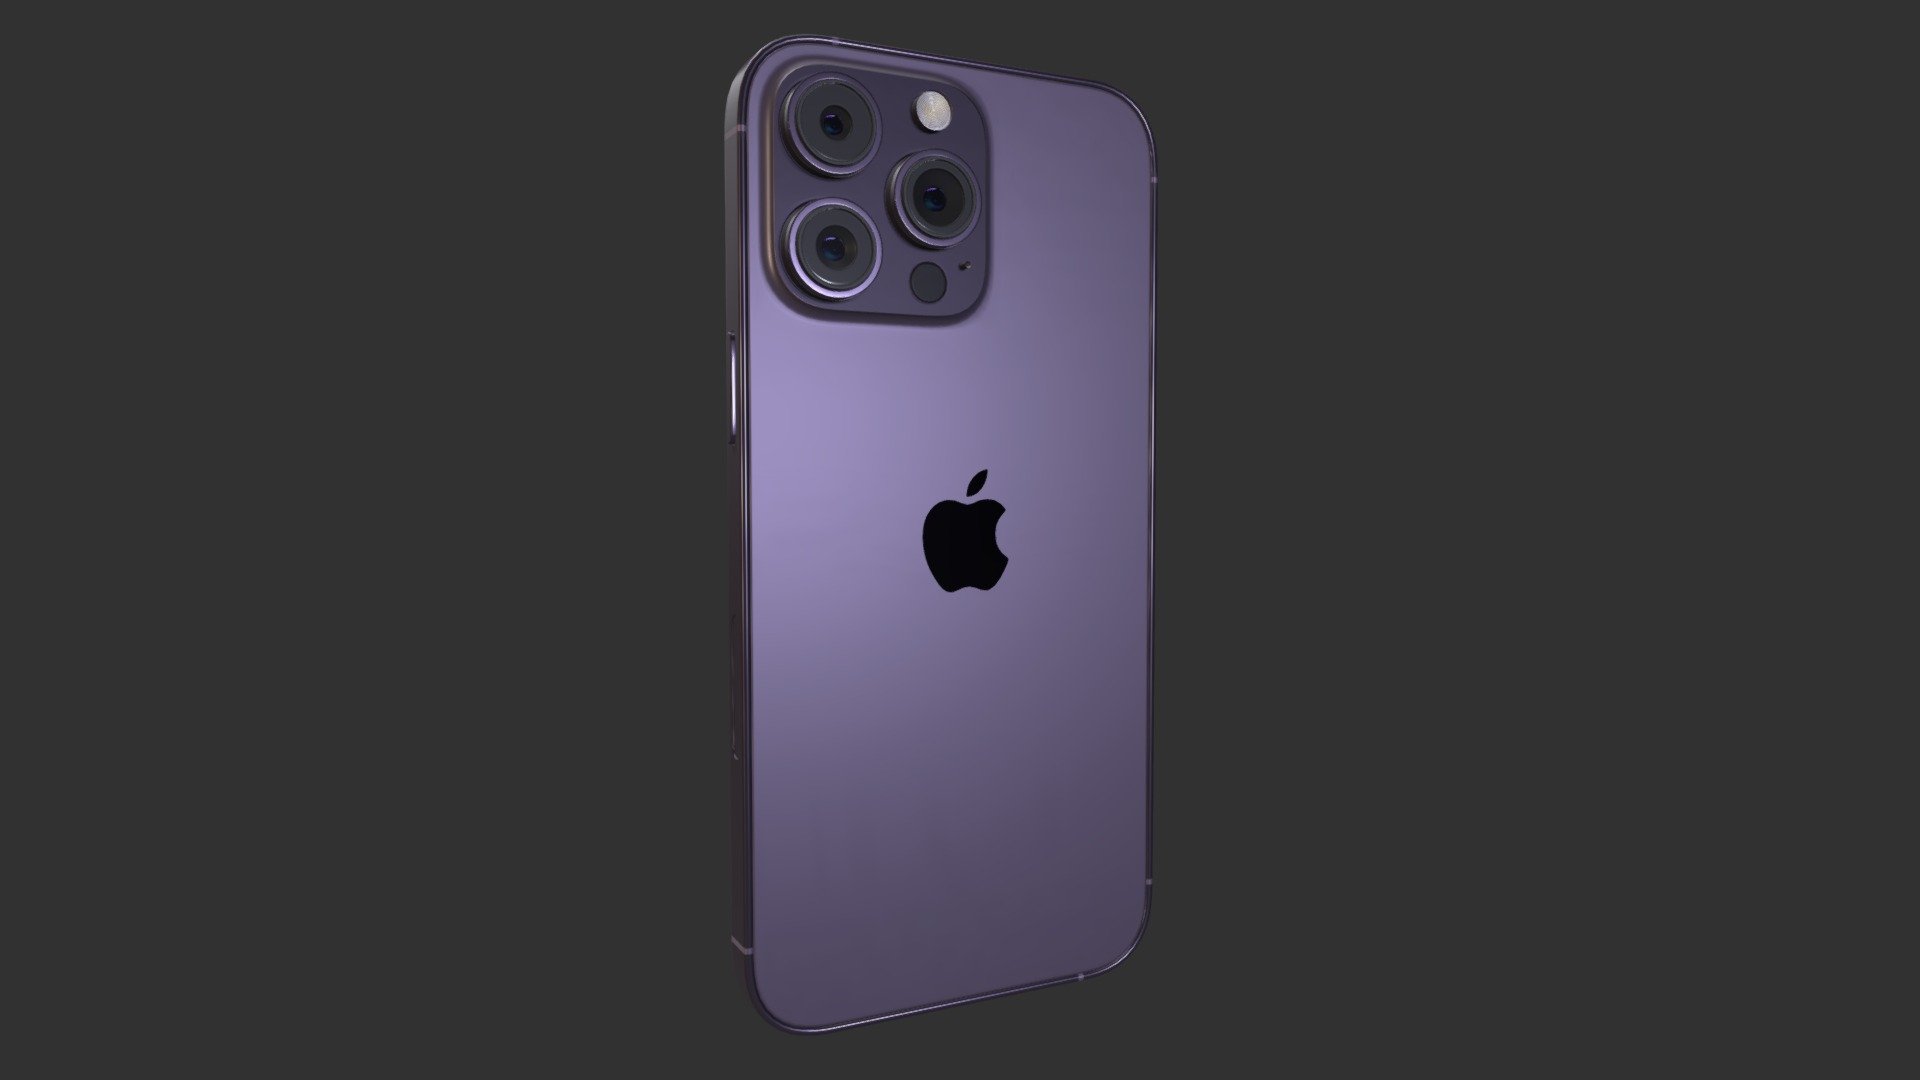 This is high detailed 3d model of Appe iPhone 14 Pro Max Deep Purple 2022

The model was created in Blender 3.3.1

3D formats: / FBX / - iPhone 14 Pro Max Deep Purple 2022 - 3D model by ShaunBr 3d model